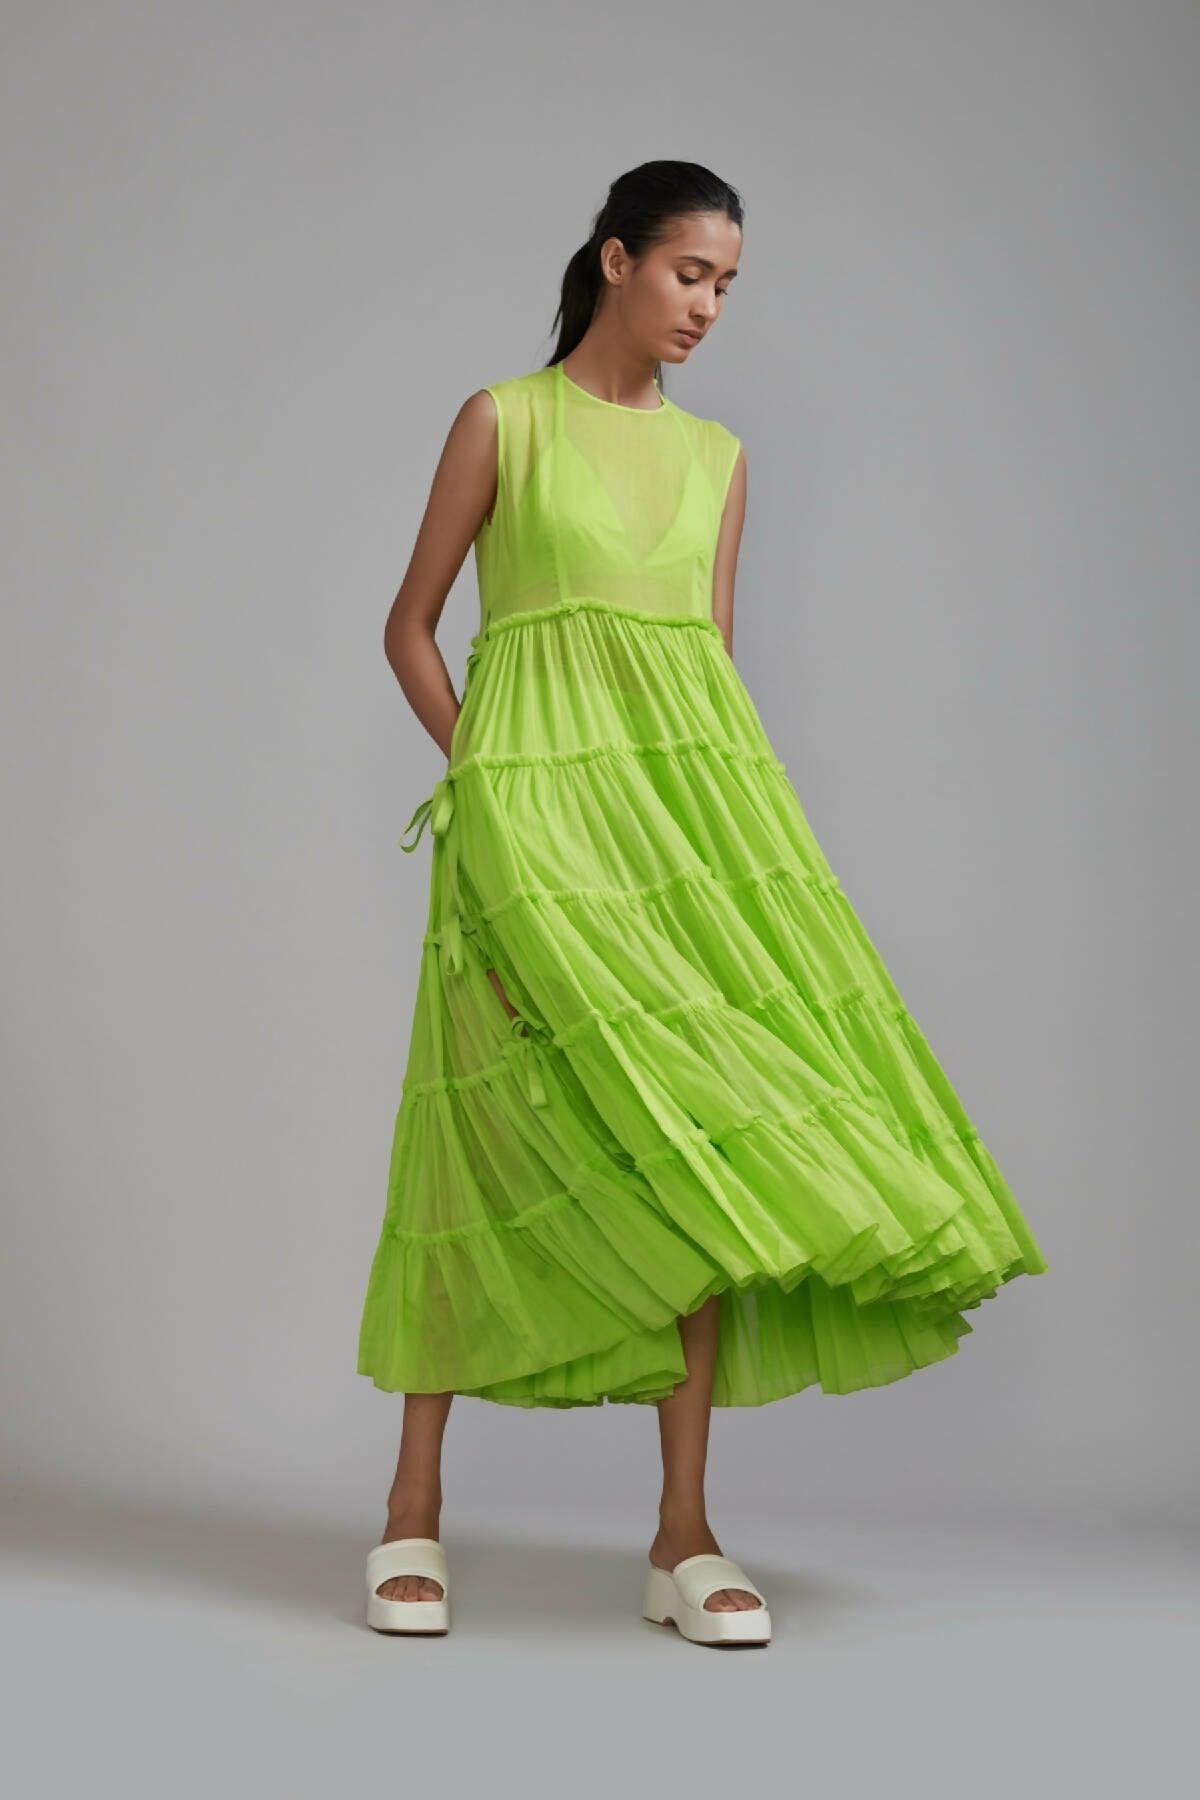 Neon Green Tiered Tie Tunic by MATI